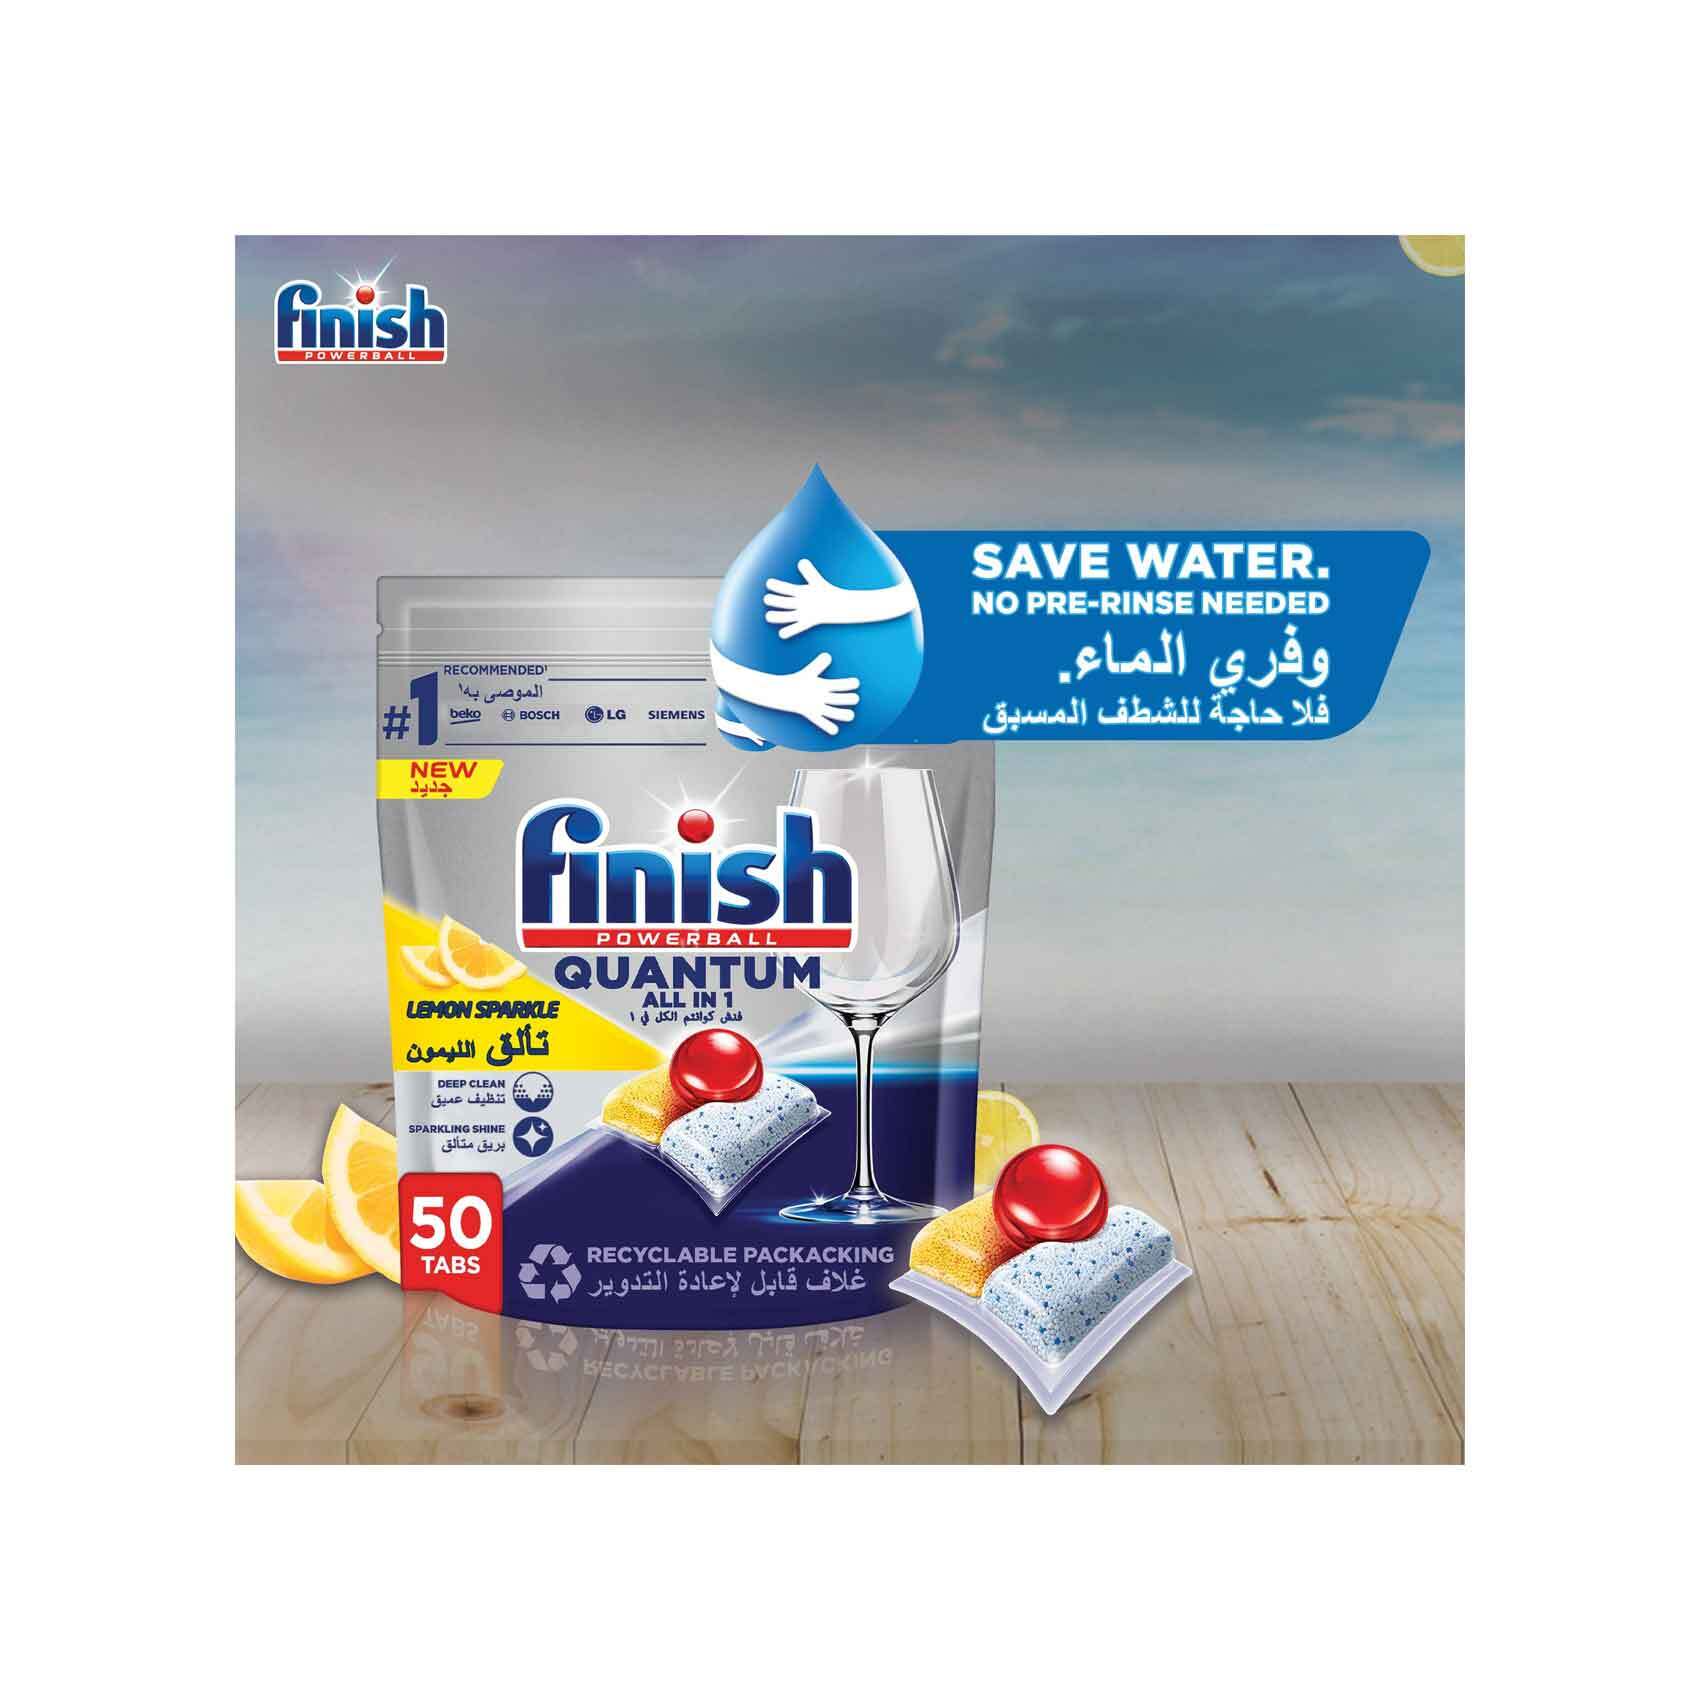 Finish Ultimate Plus All in One Dishwasher Tablets 33 Lemon, Delivery near  you